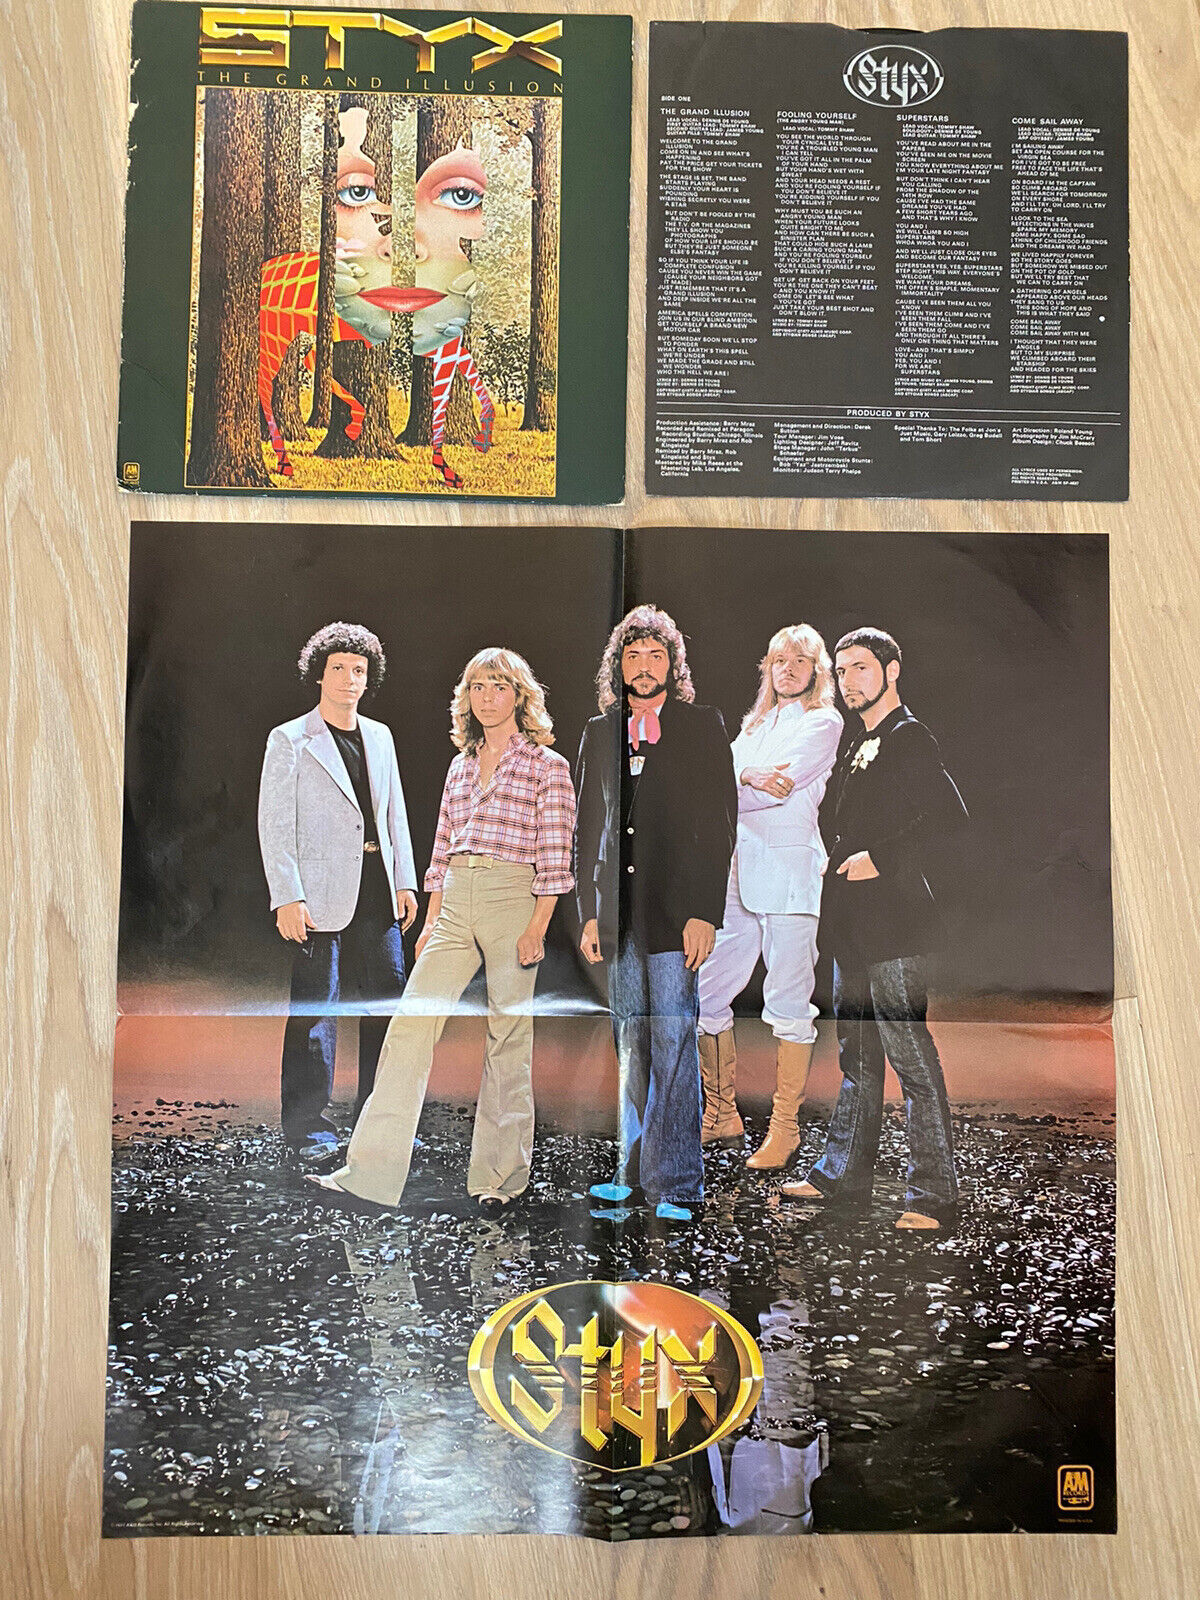 STYX The Grand Illusion 1977 Vinyl SP-4637 with Poster